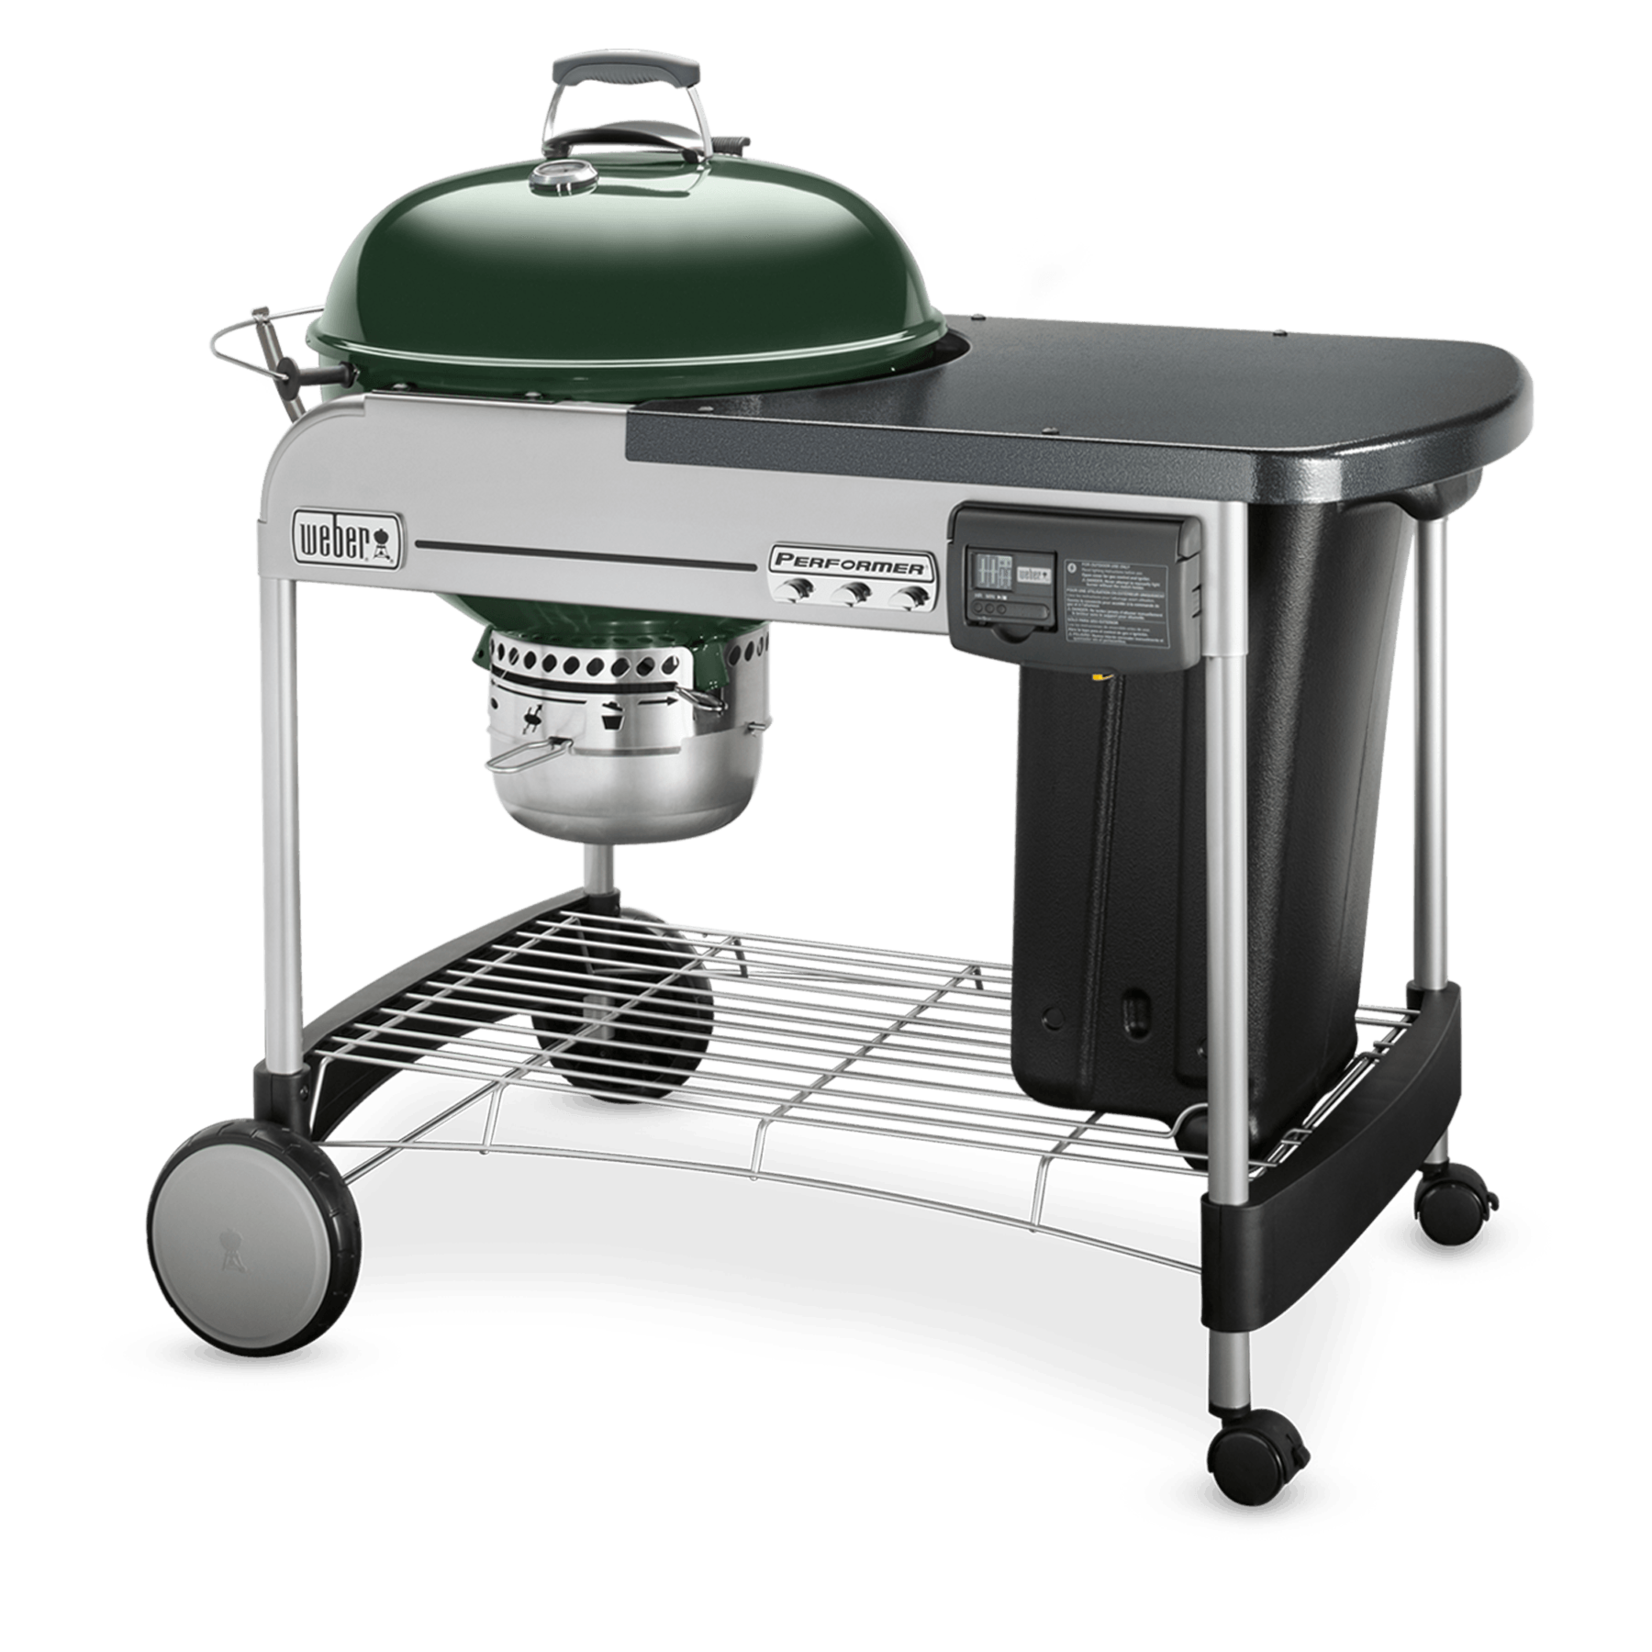 Weber Performer® Deluxe 22” Charcoal Grill, Green